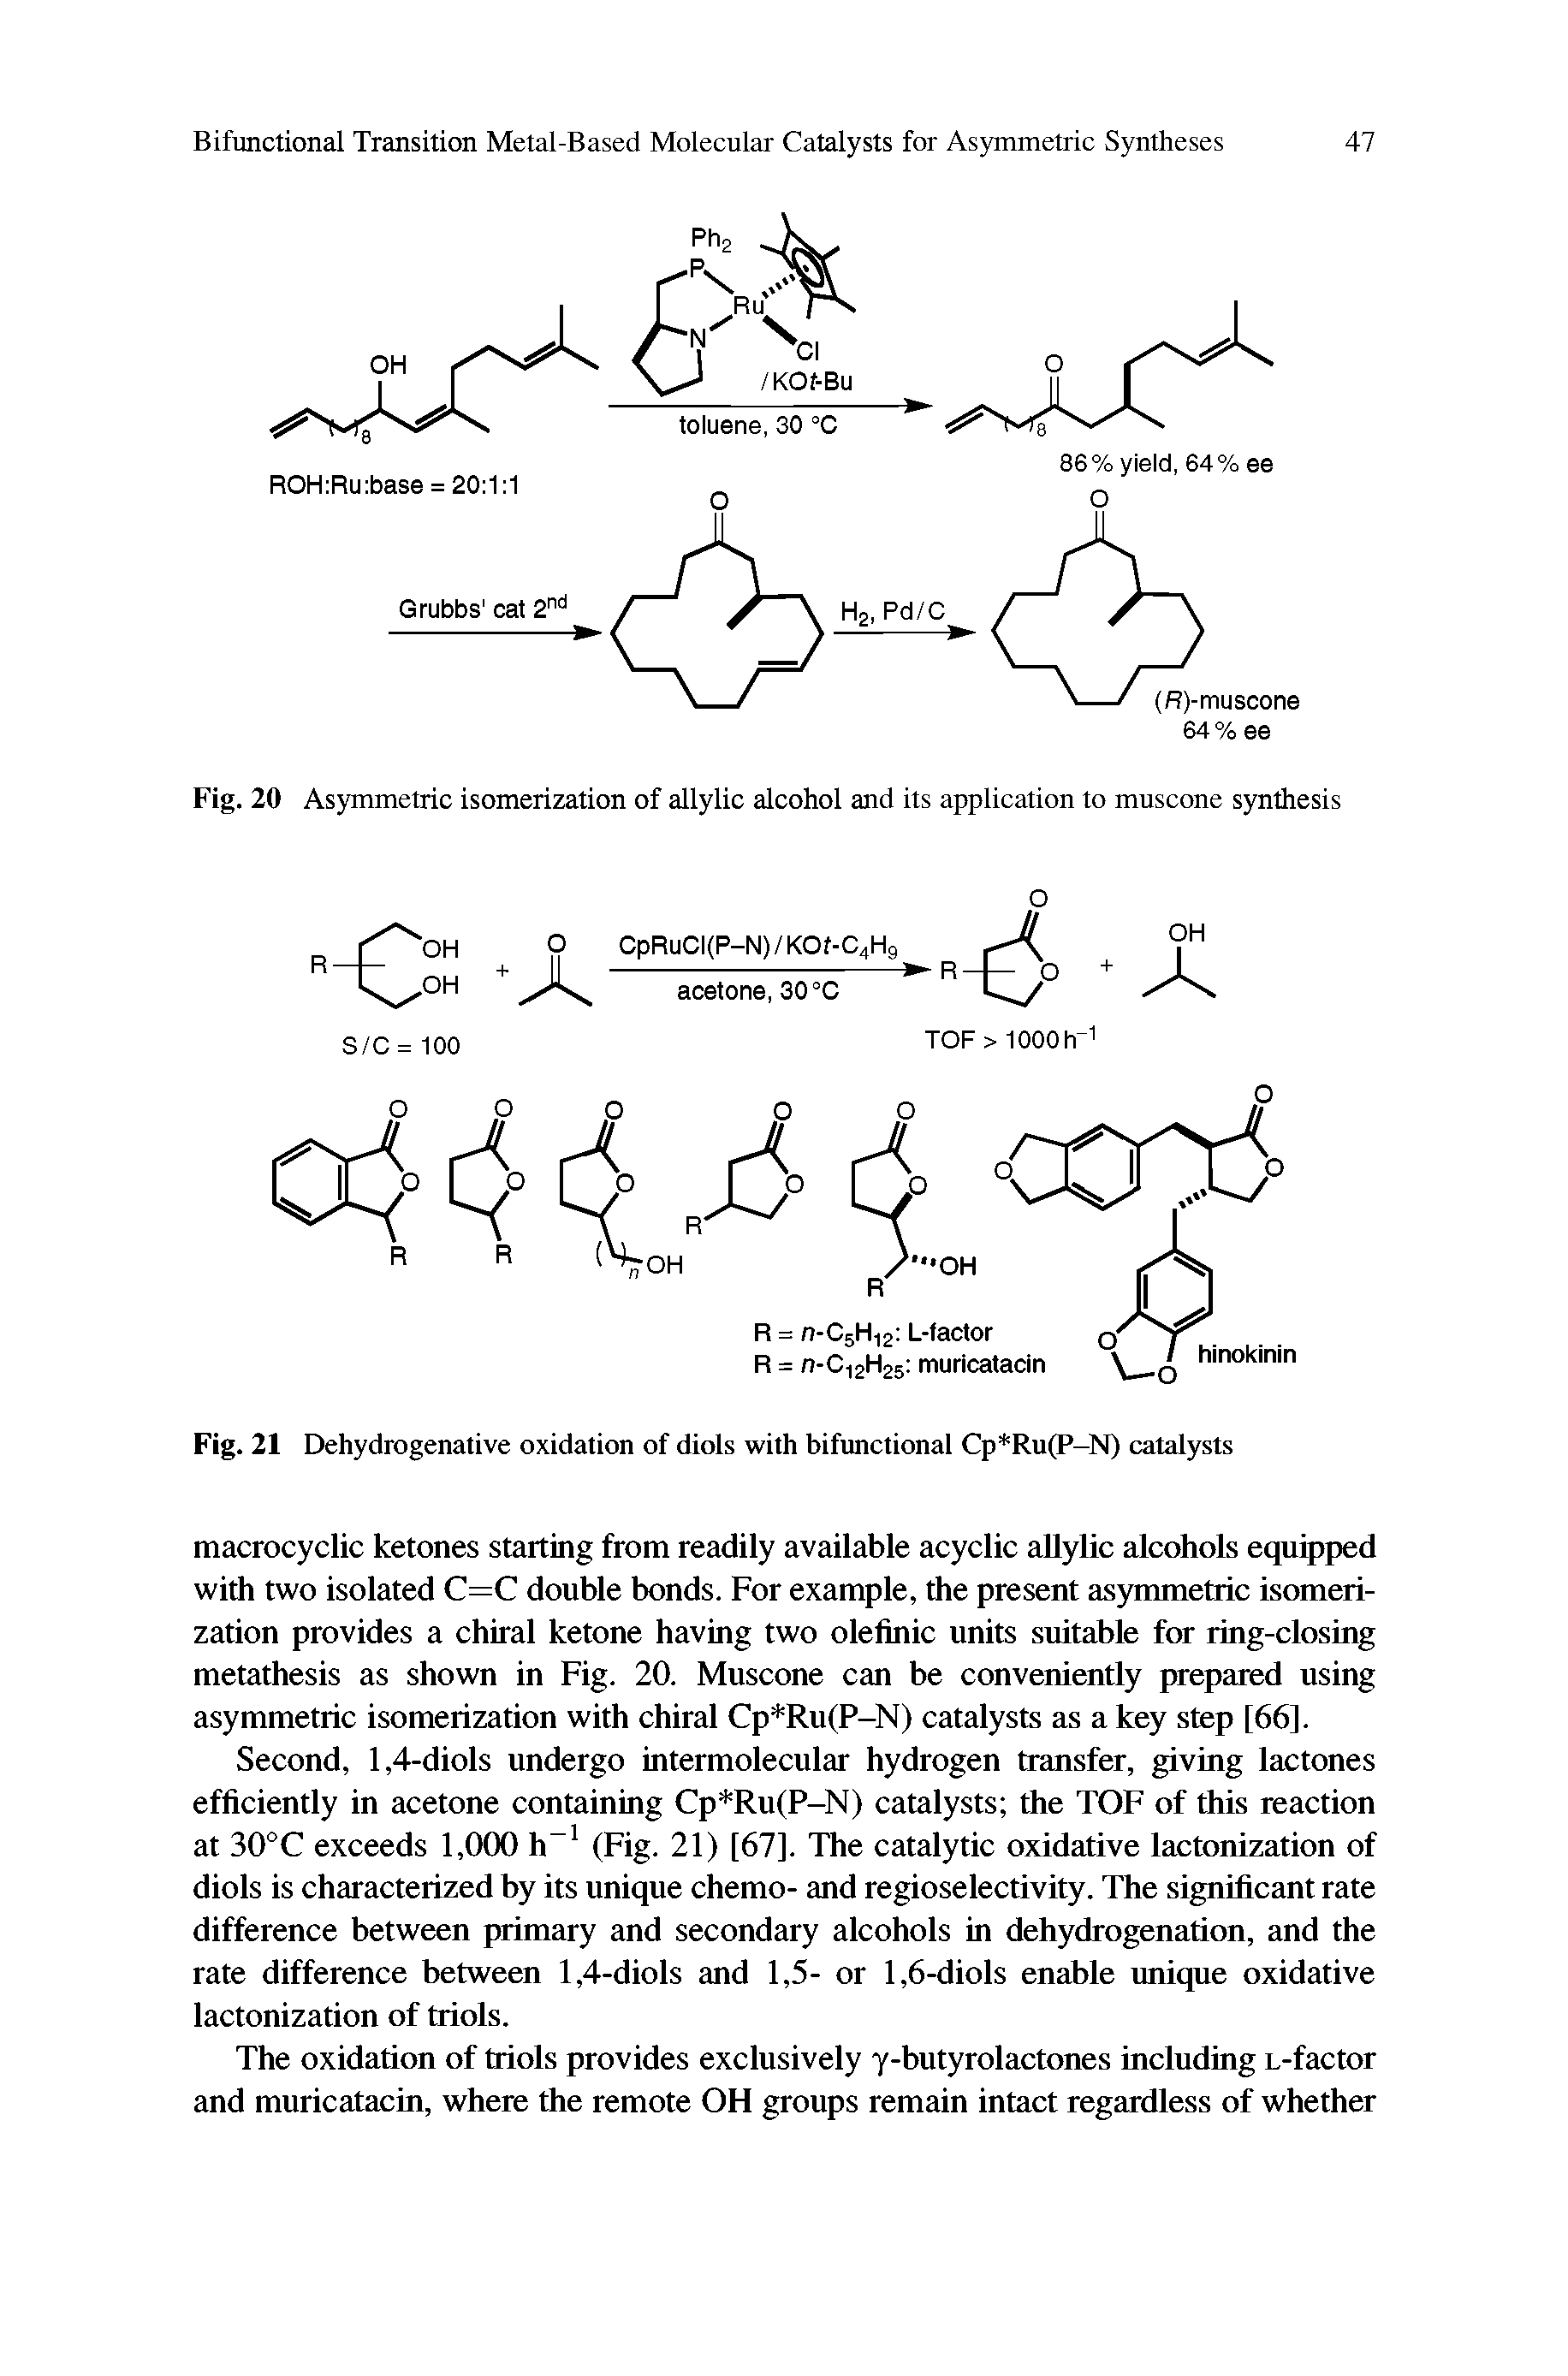 Fig. 20 Asymmetric isomerization of allylic alcohol and its application to muscone synthesis...